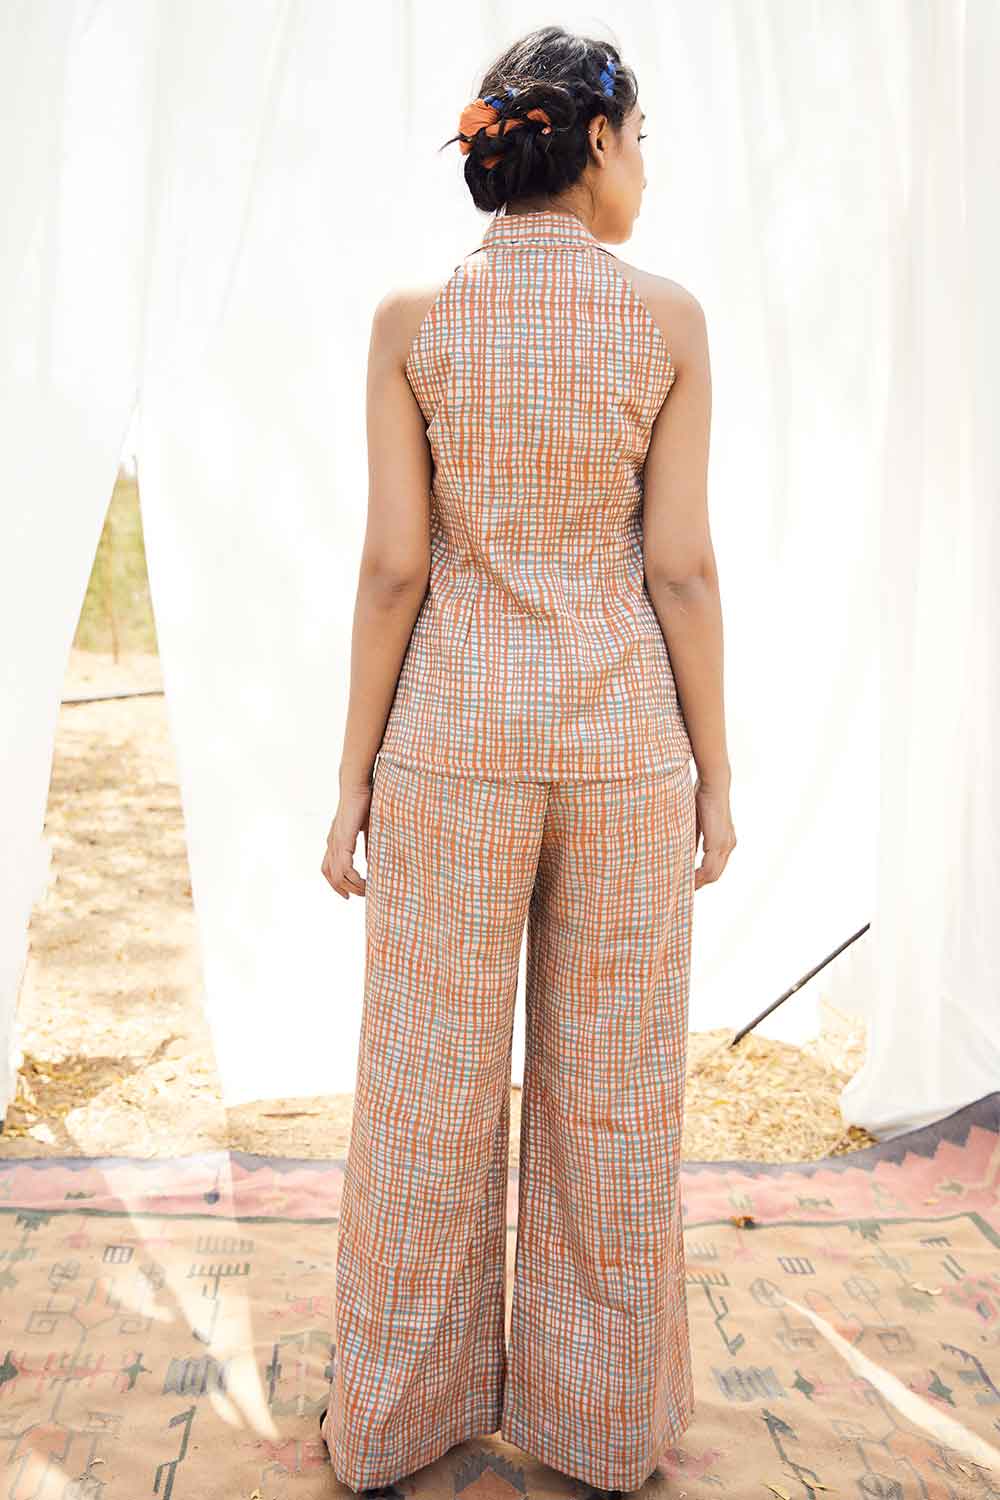 Block Printed Checkered Pant Suit as seen on P. V. Sindhu